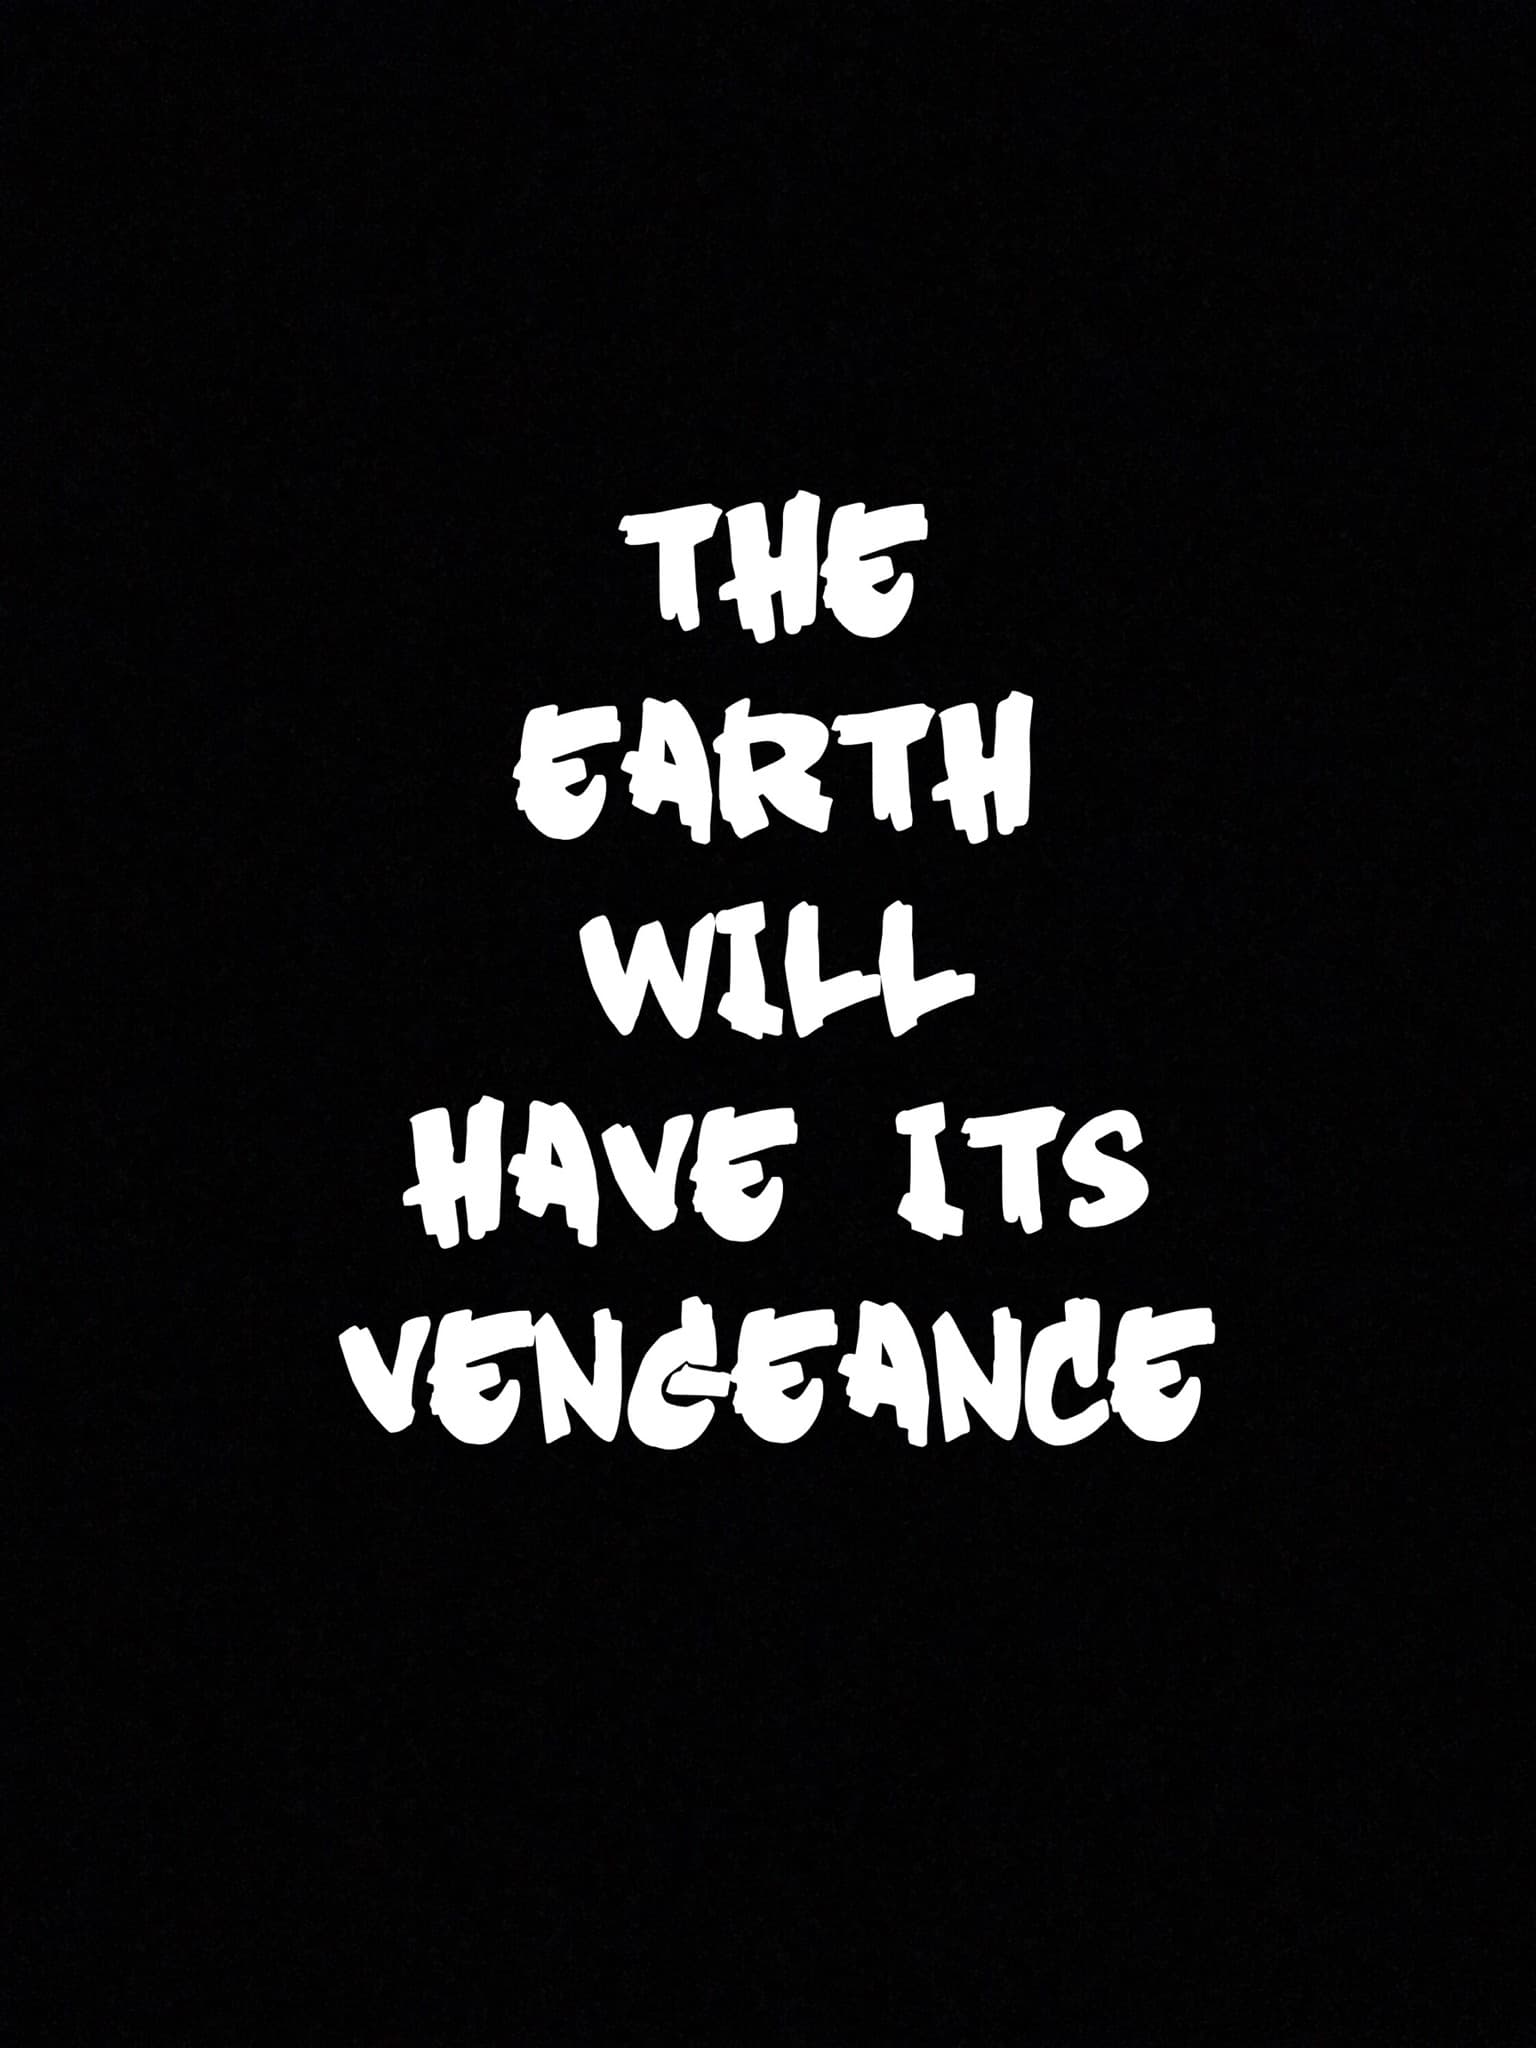 The Earth Will Have Its Vengeance